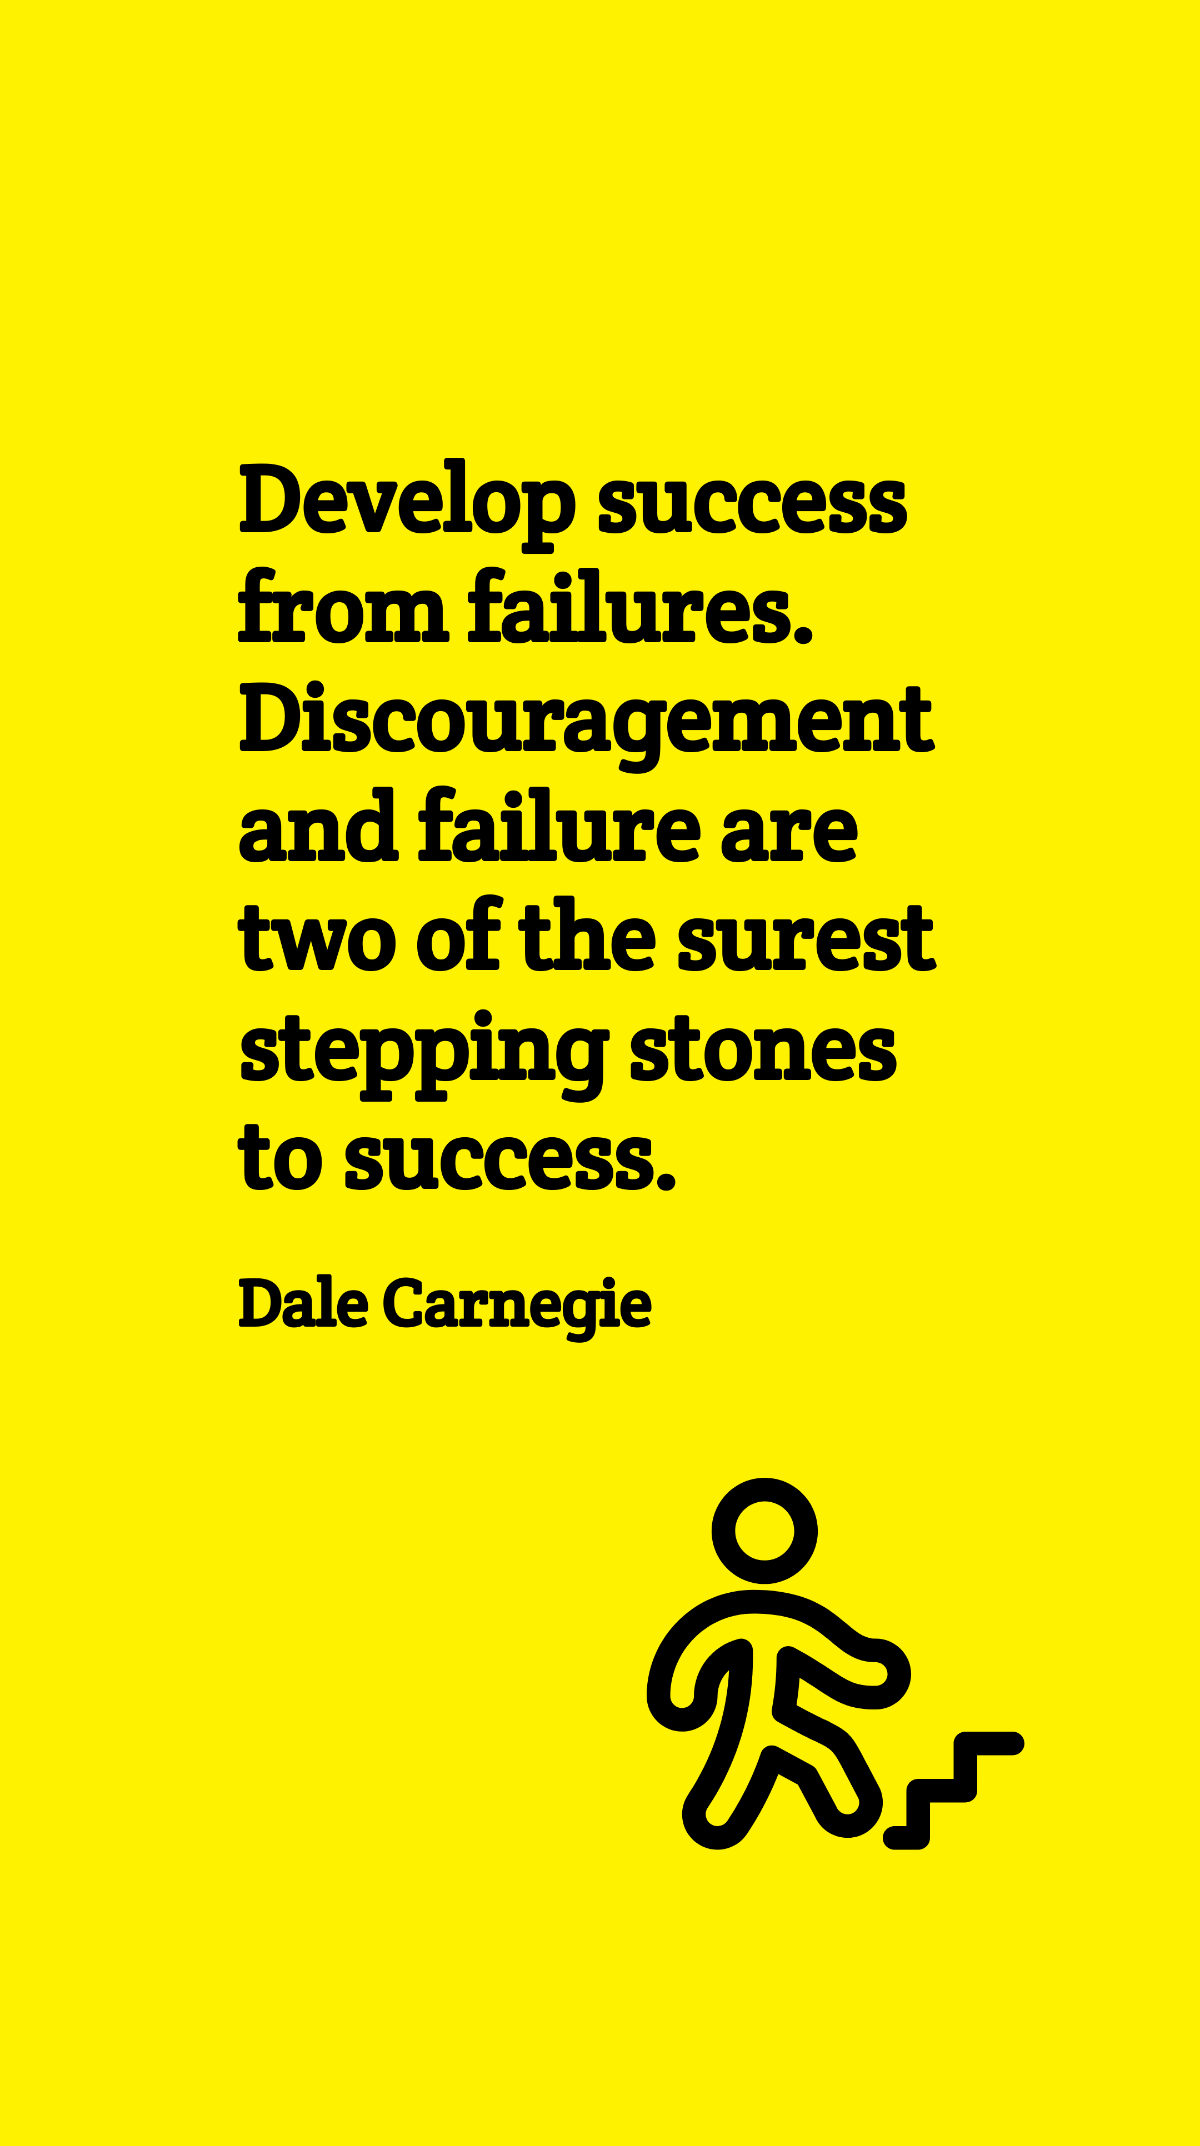 Free Dale Carnegie - Develop success from failures. Discouragement and failure are two of the surest stepping stones to success. Template